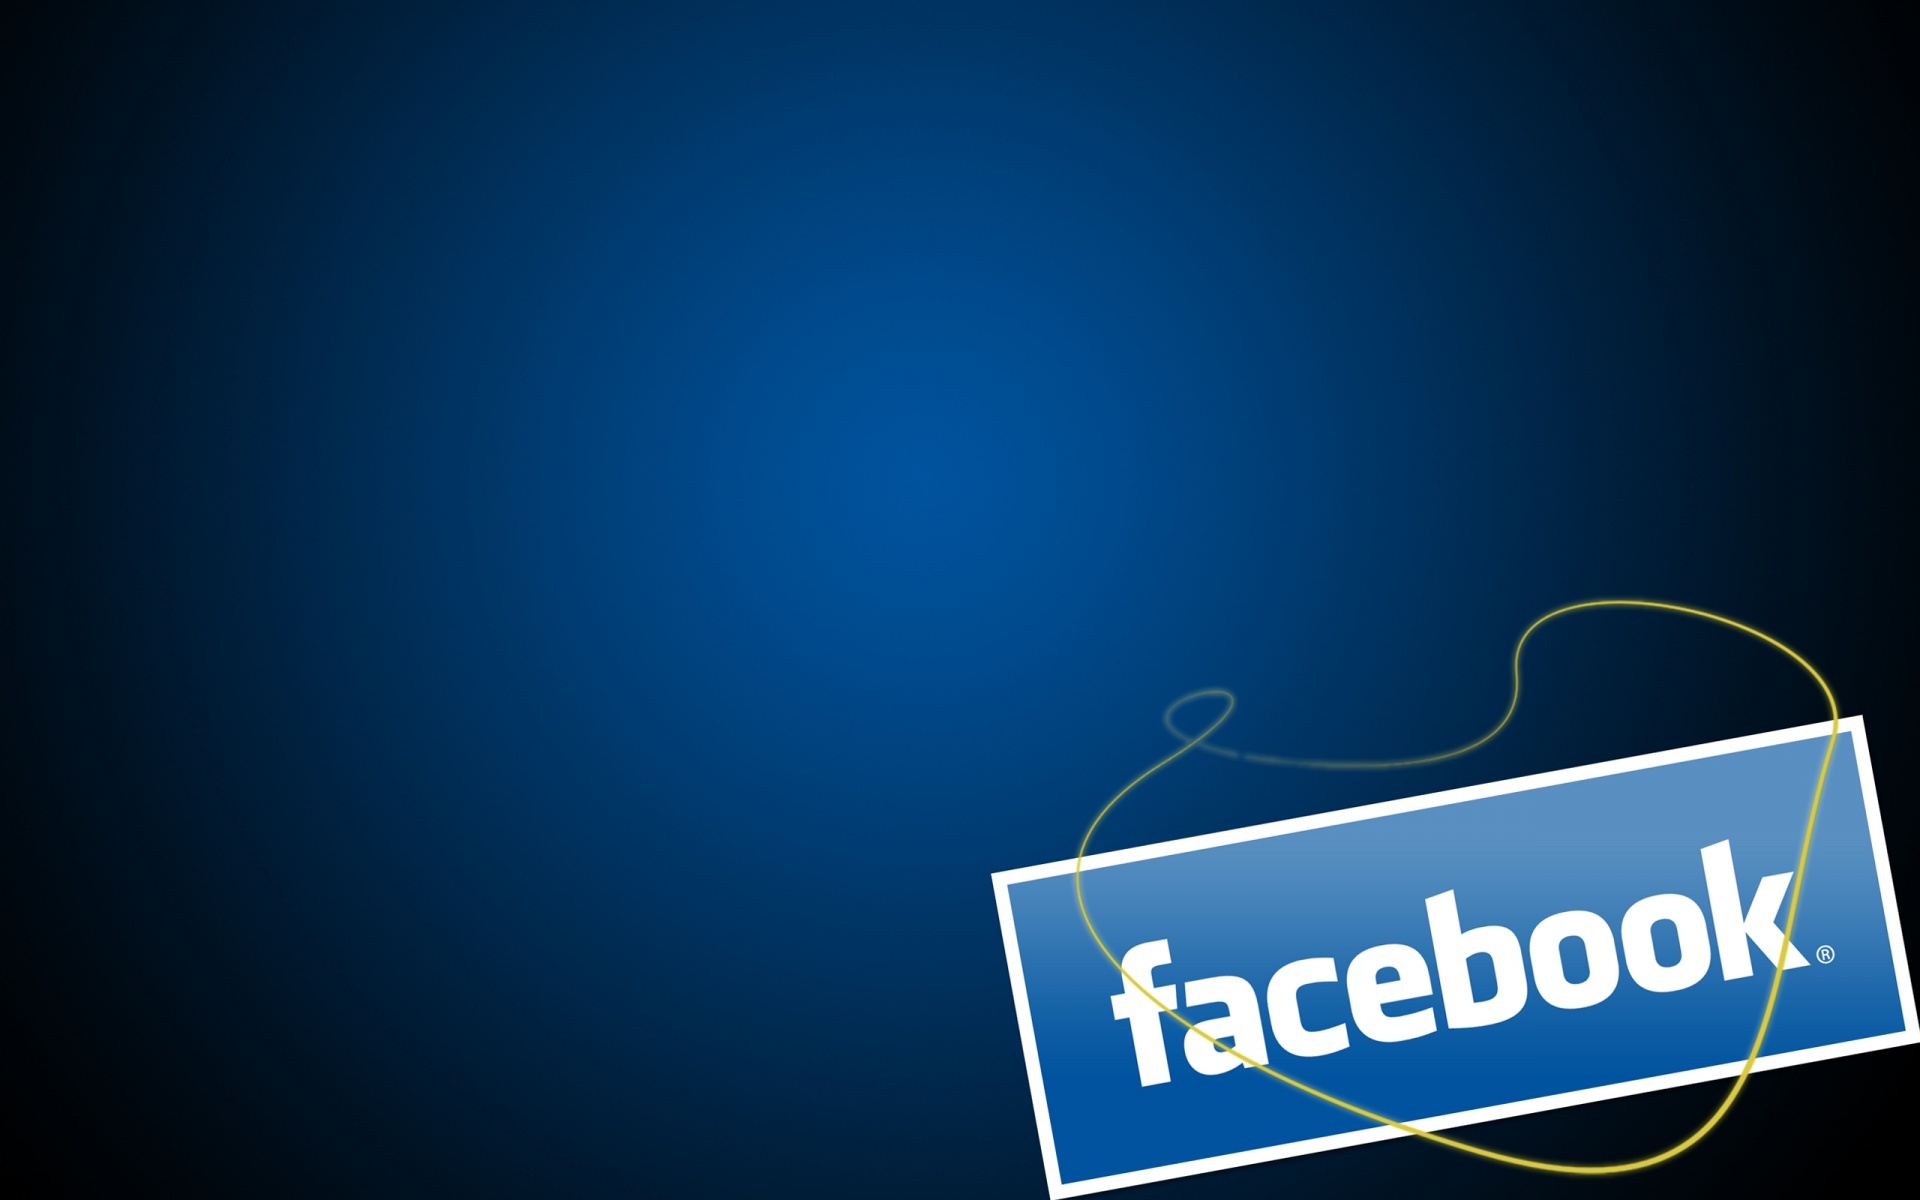 Facebook: Ranked third worldwide among the most visited websites as of July 2022. 1920x1200 HD Wallpaper.